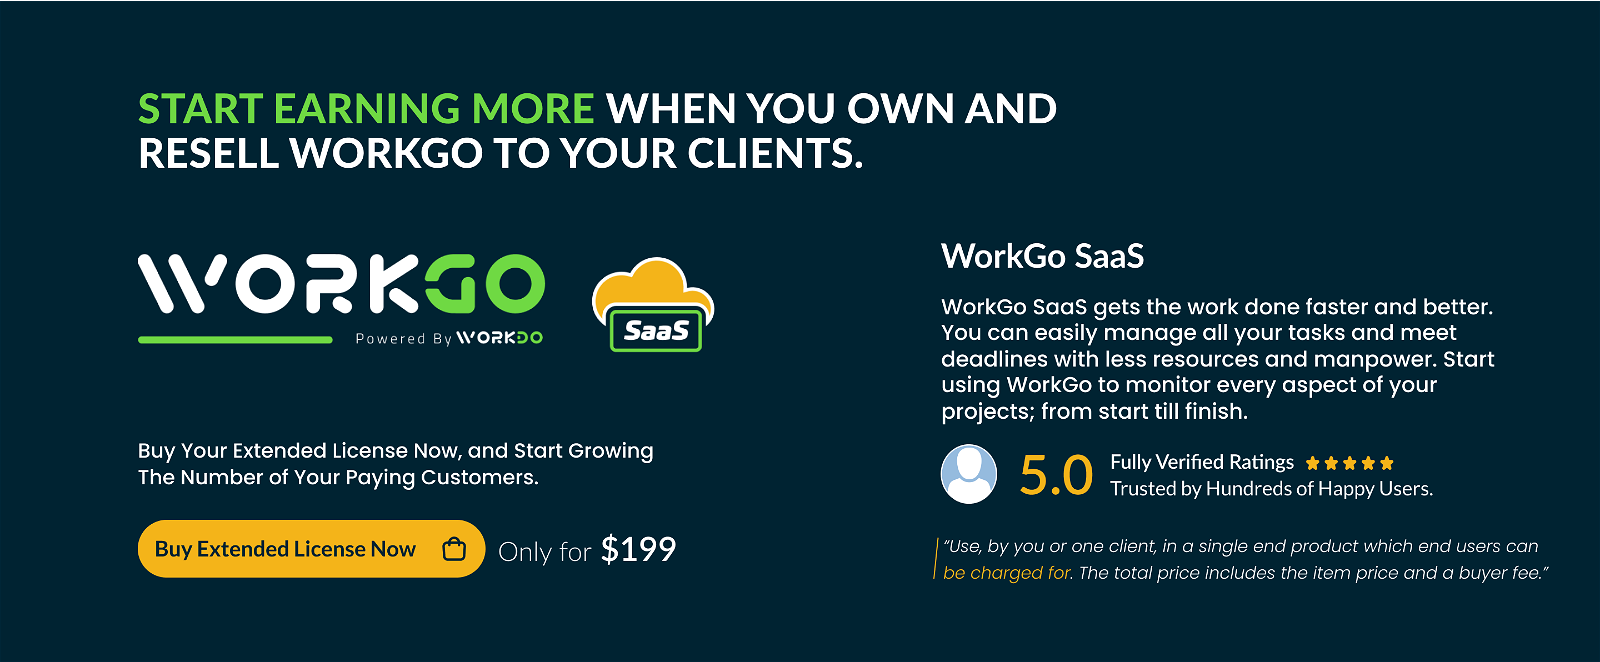 WorkGo SaaS - Lead and Project Management Tool - 6